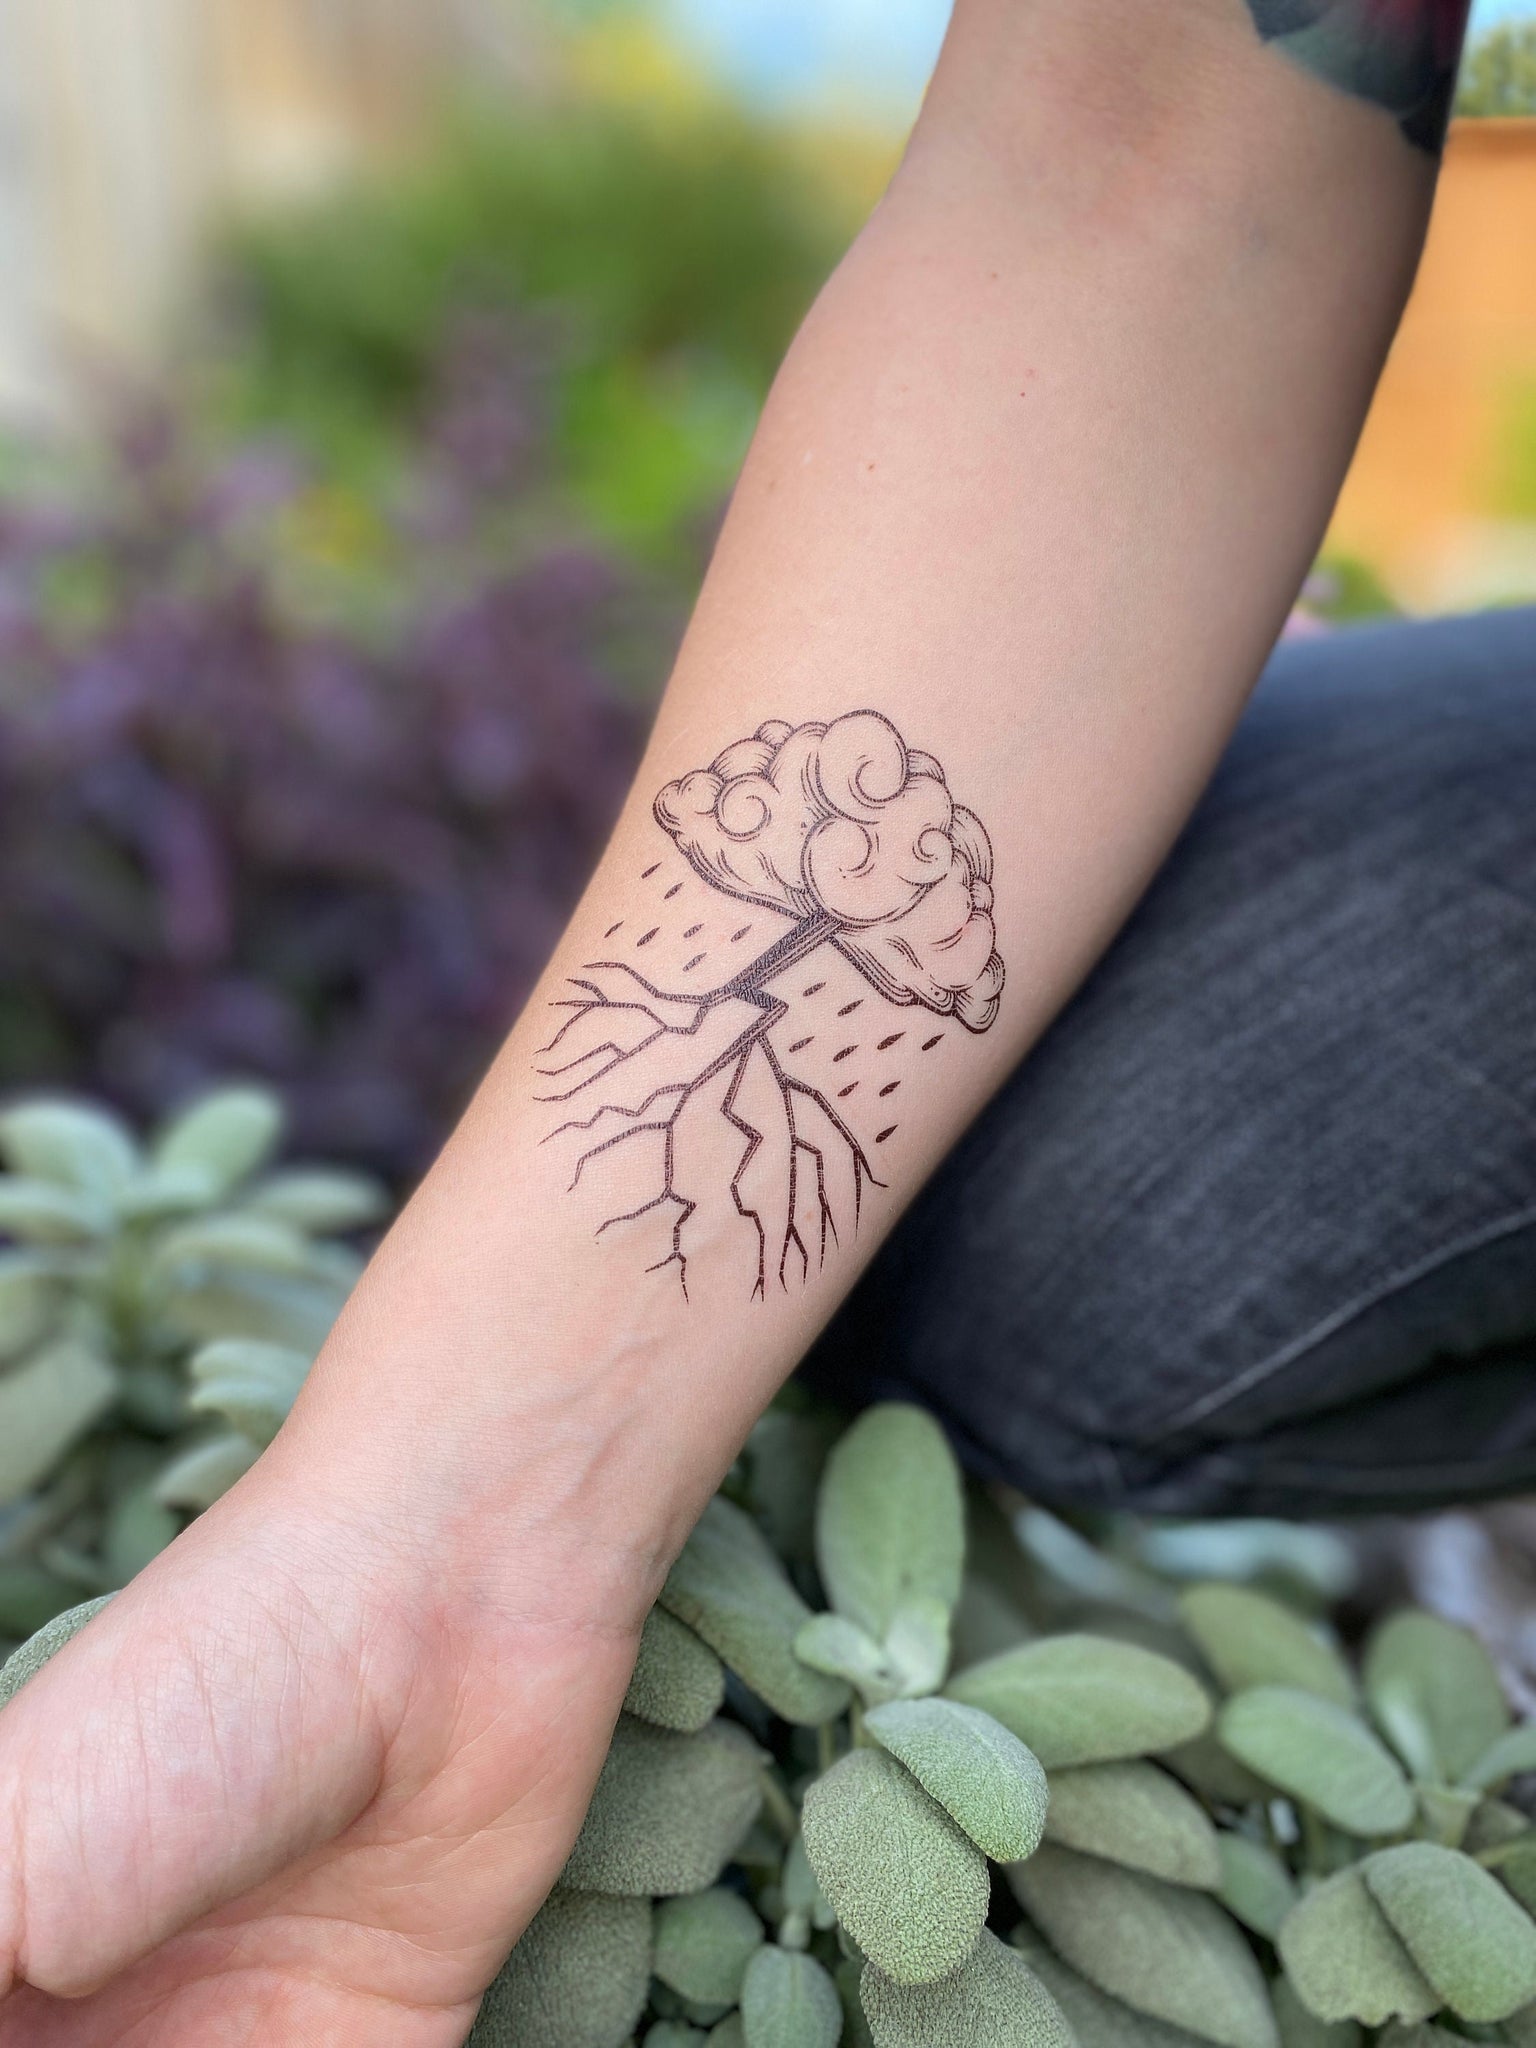 Outline Raining Clouds Tattoo Image